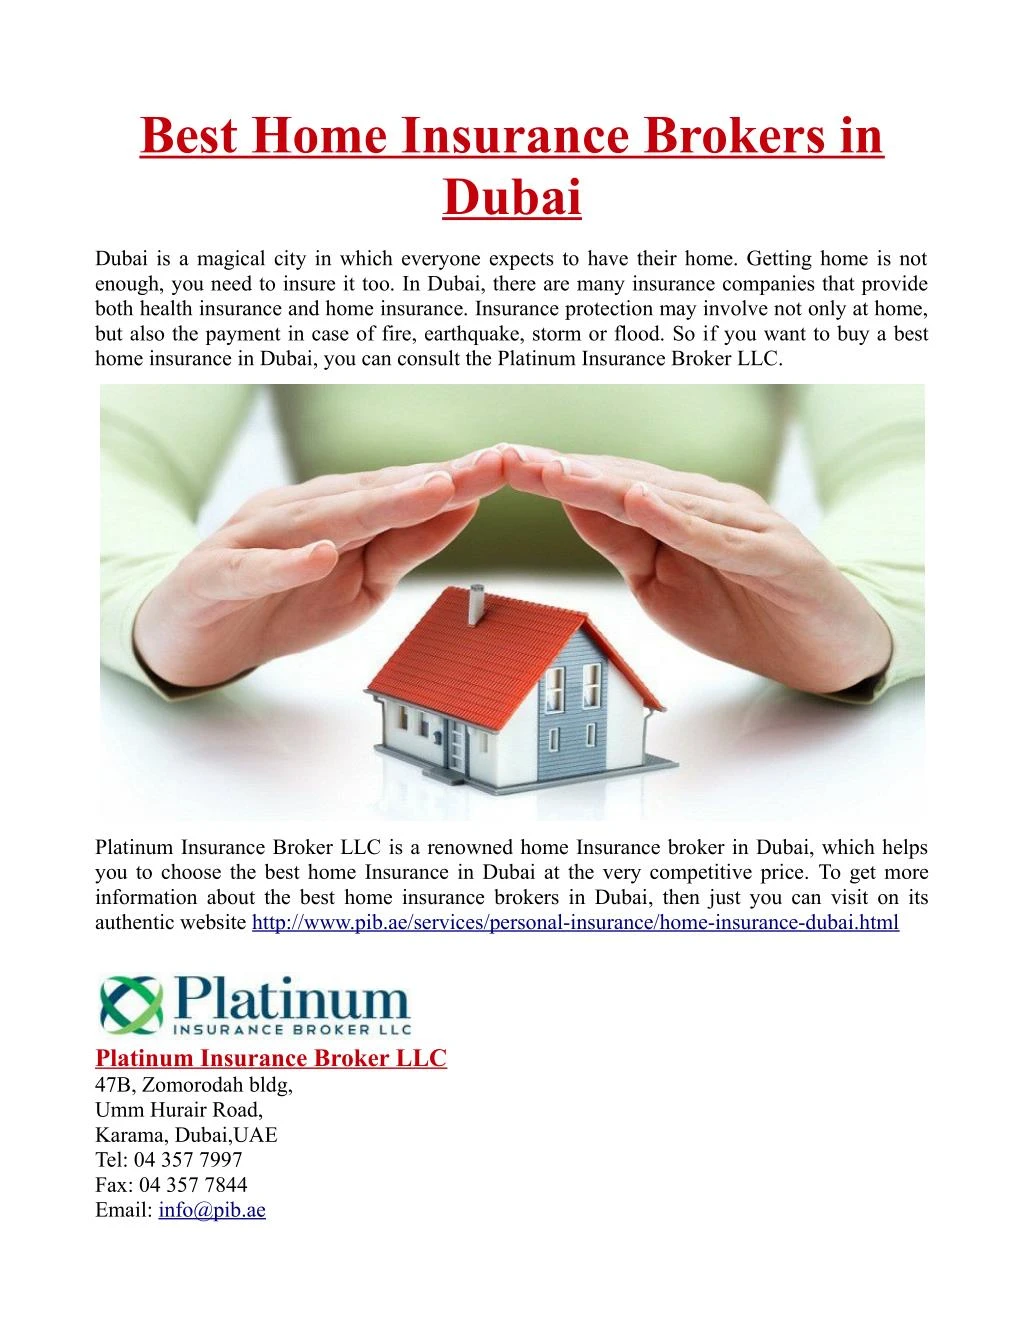 PPT Best Home Insurance Brokers in Dubai PowerPoint